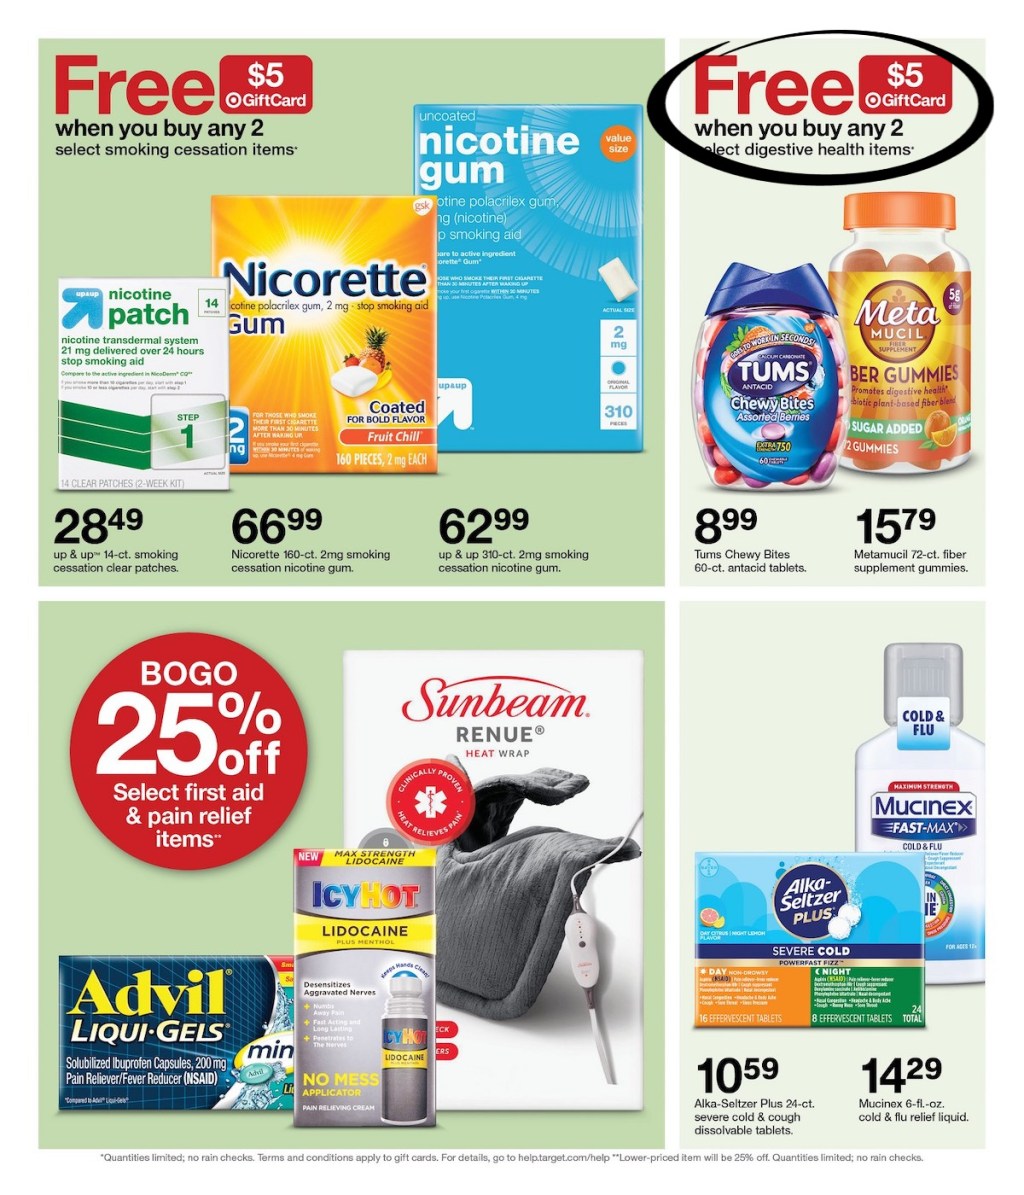 Next Week Target Ad Deals - Hottest Sales & Circle Offers!